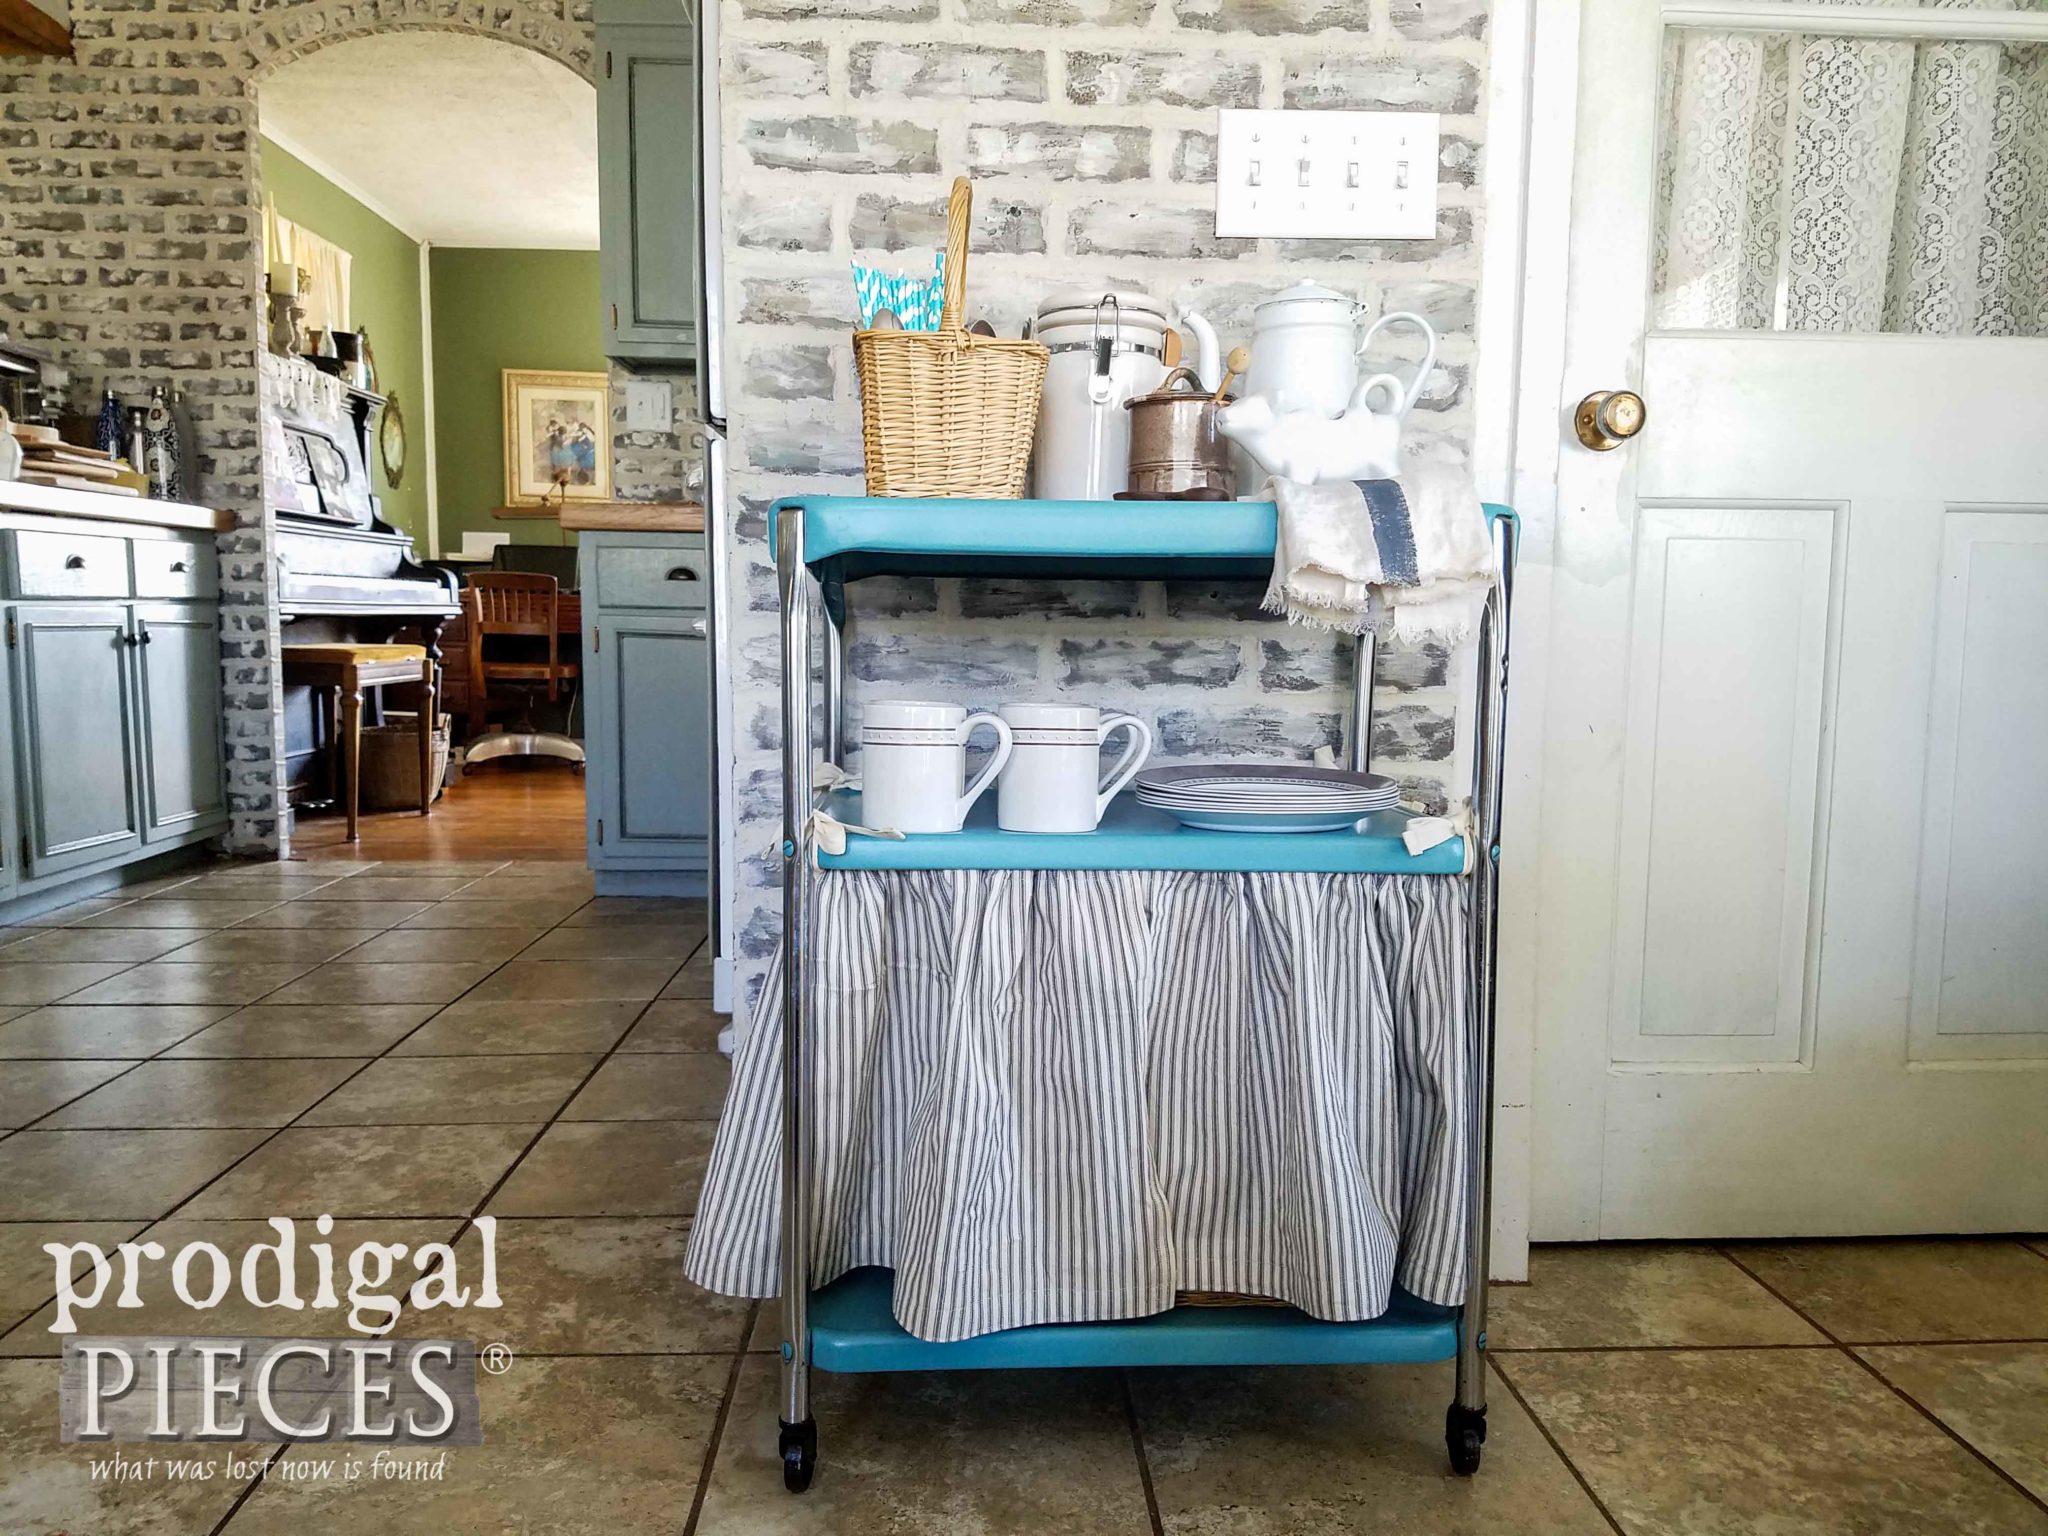 Restored Cosco Serving Cart with DIY Dust Ruffle by Larissa of Prodigal Pieces | prodigalpieces.com